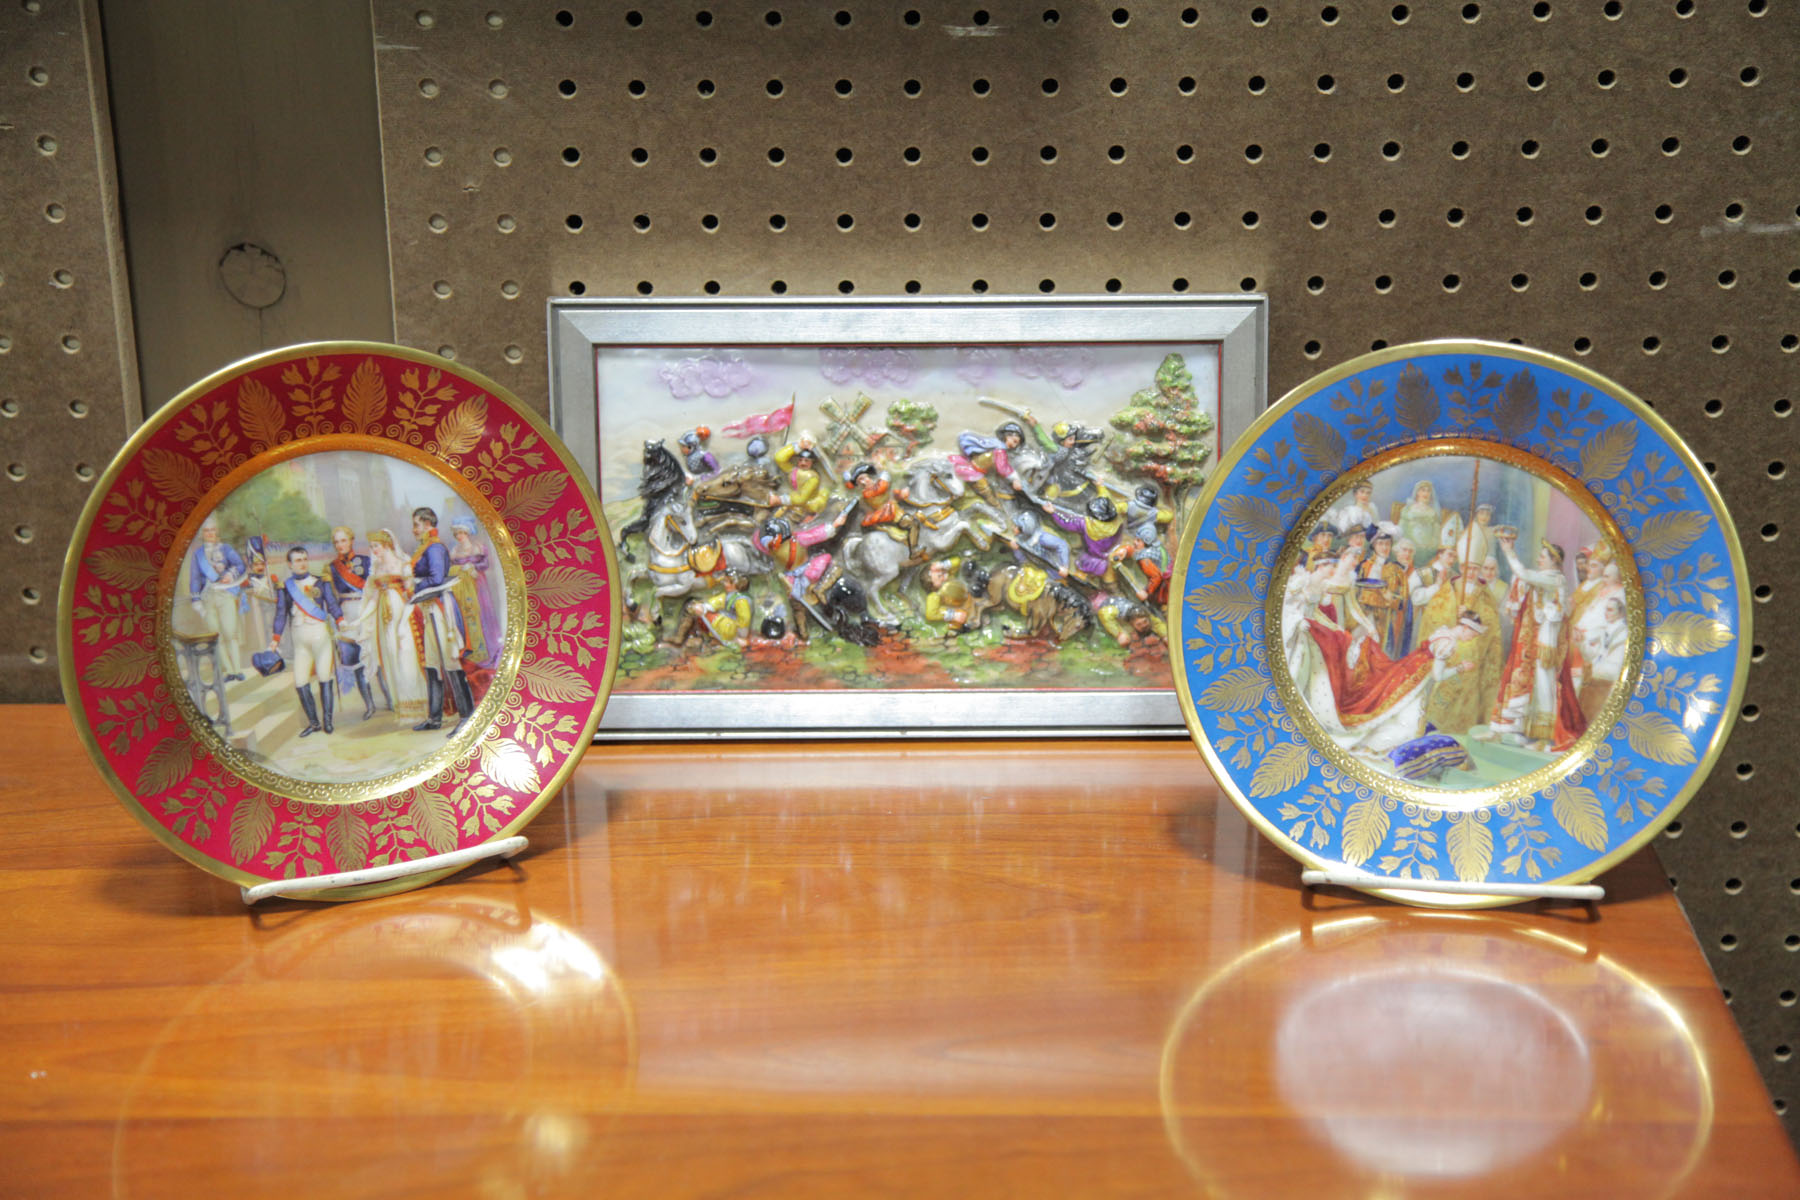 TWO PLATES AND A FRAMED PLAQUE 10c186